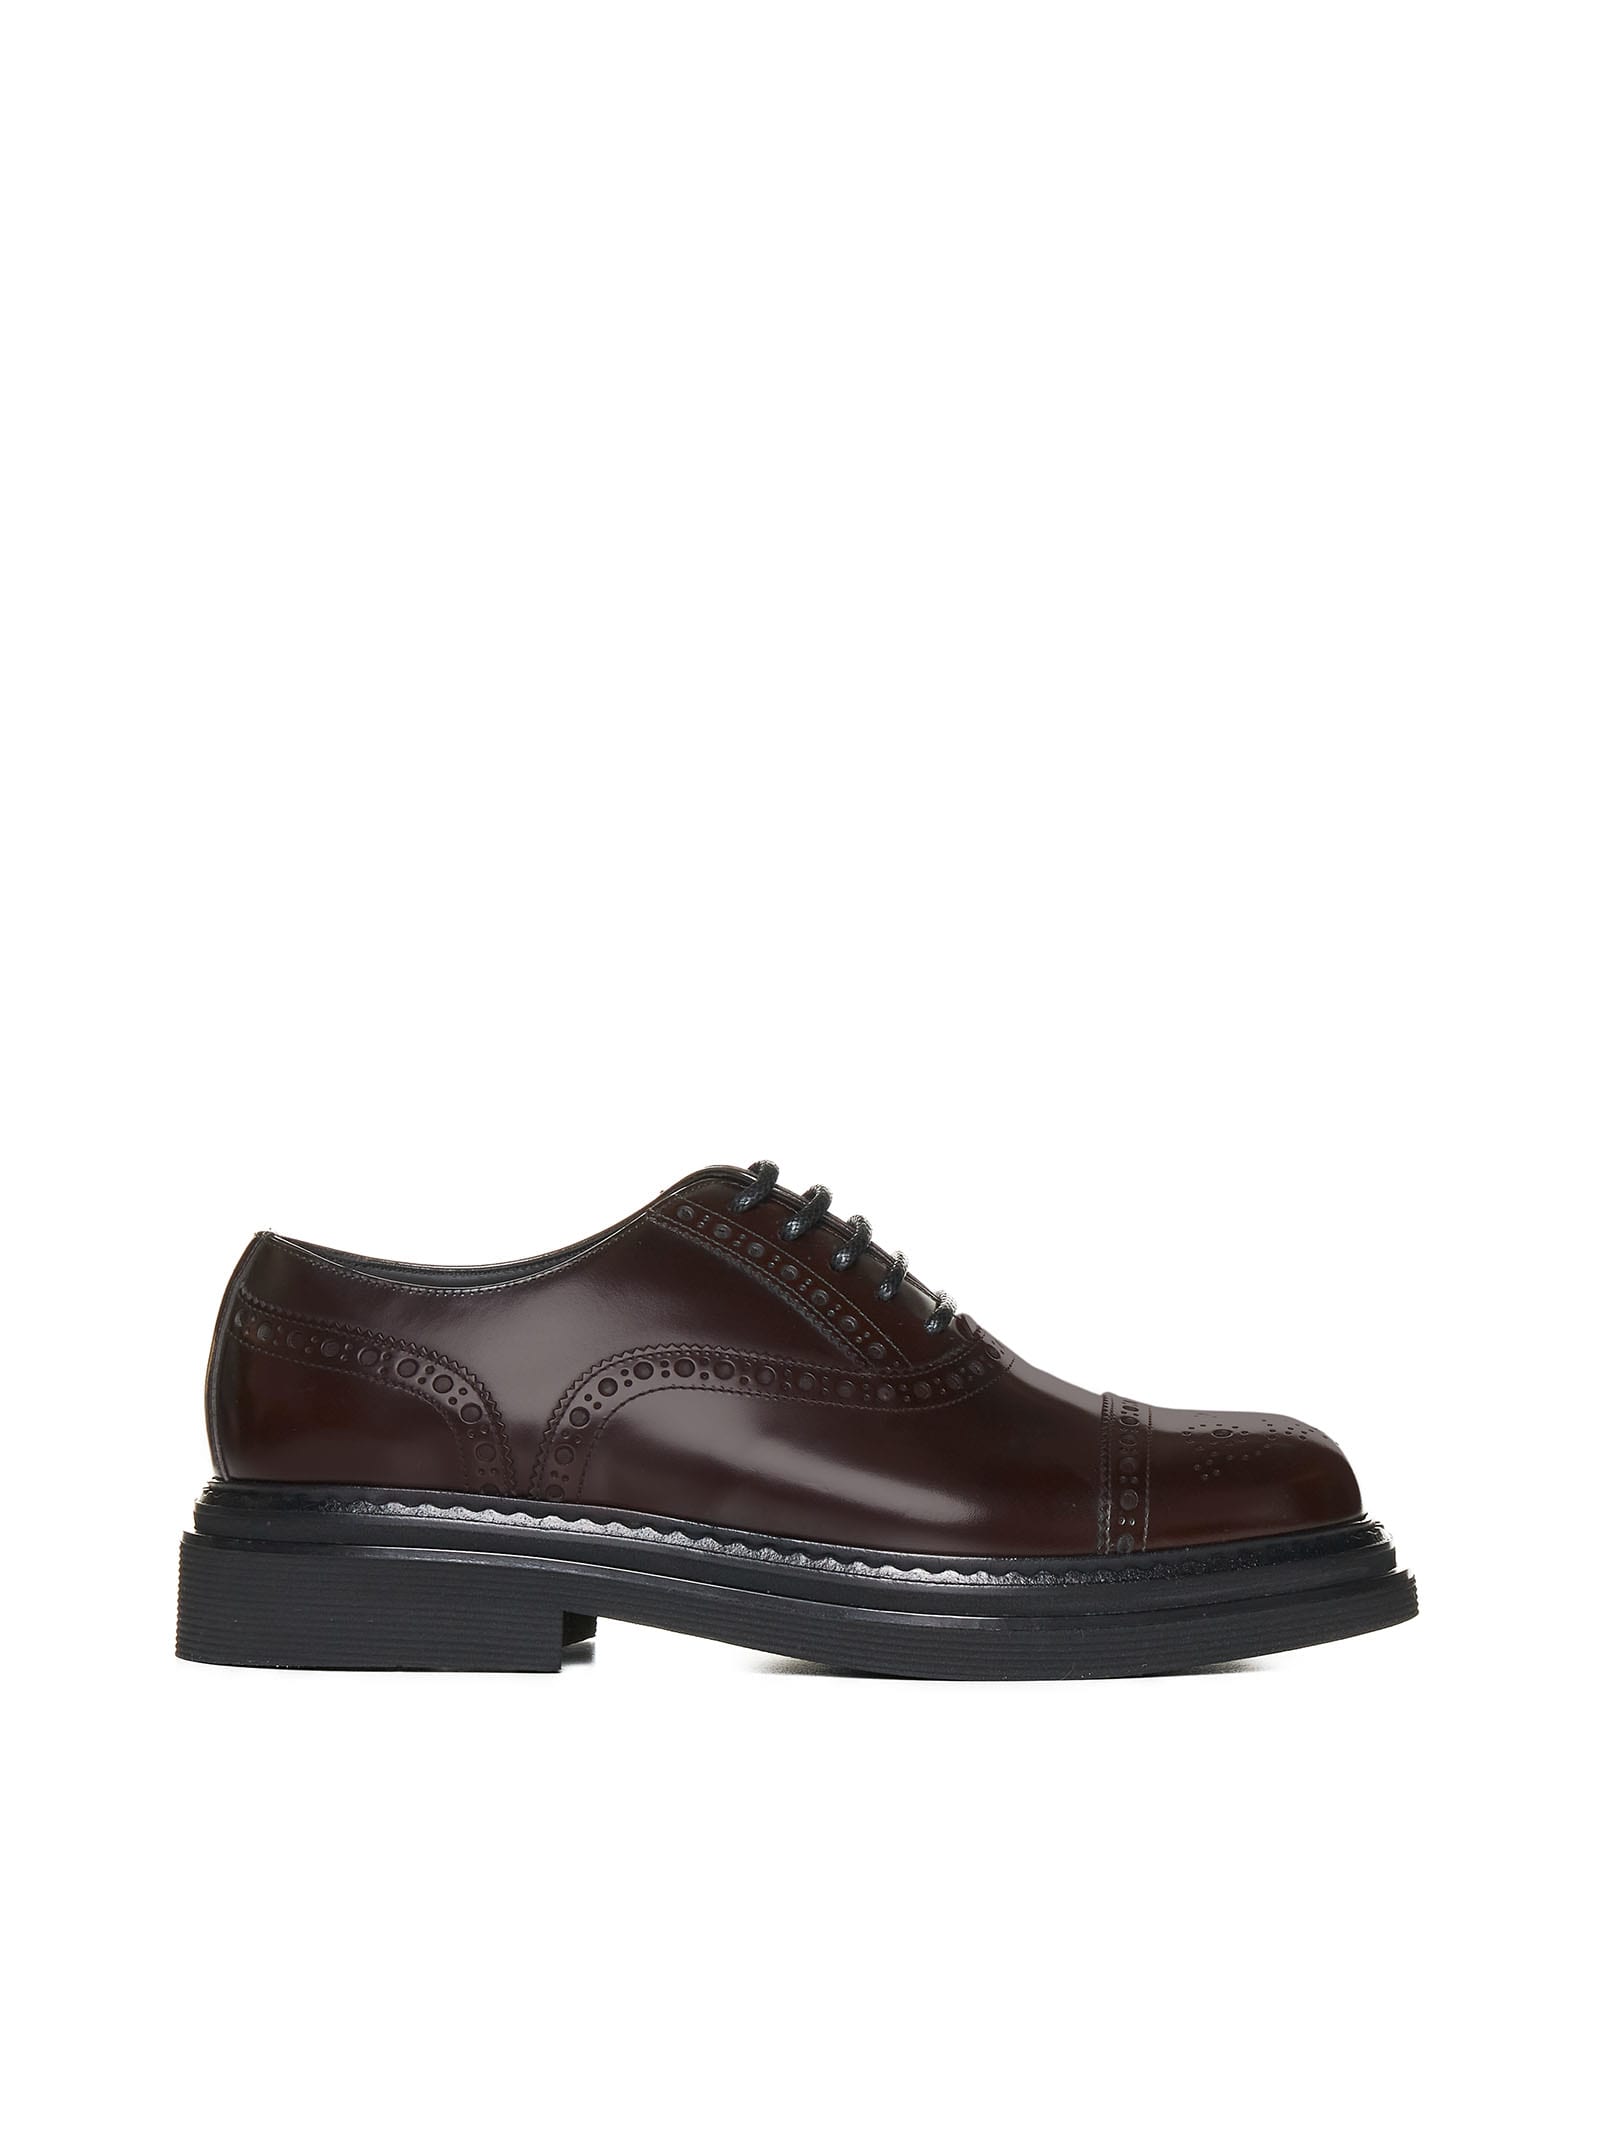 DOLCE & GABBANA BRUSHED LEATHER OXFORD SHOES